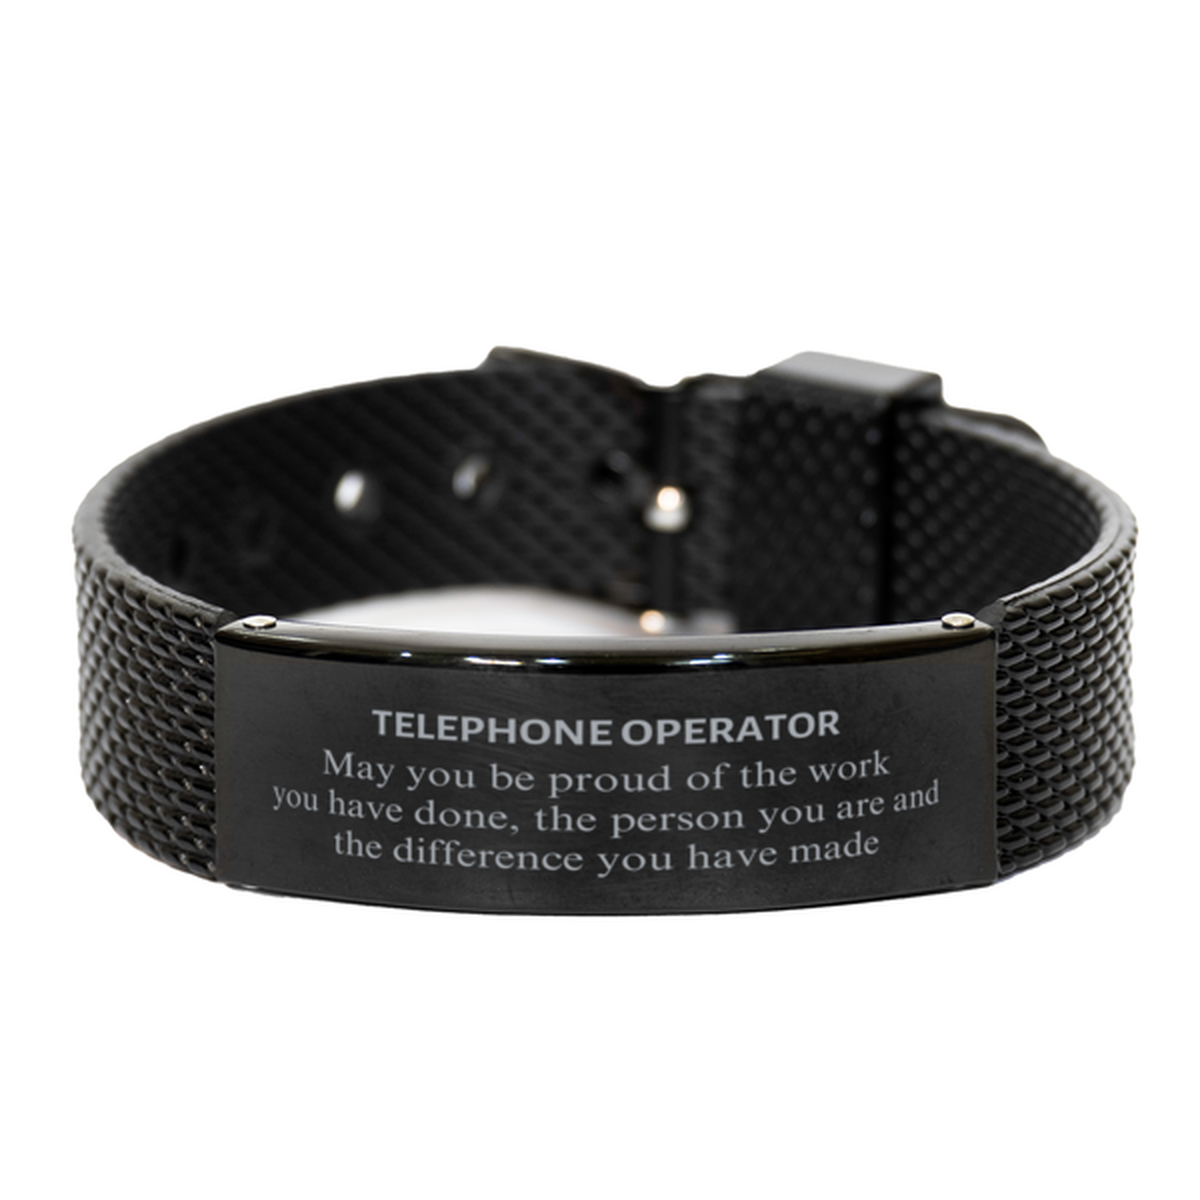 Telephone Operator May you be proud of the work you have done, Retirement Telephone Operator Black Shark Mesh Bracelet for Colleague Appreciation Gifts Amazing for Telephone Operator